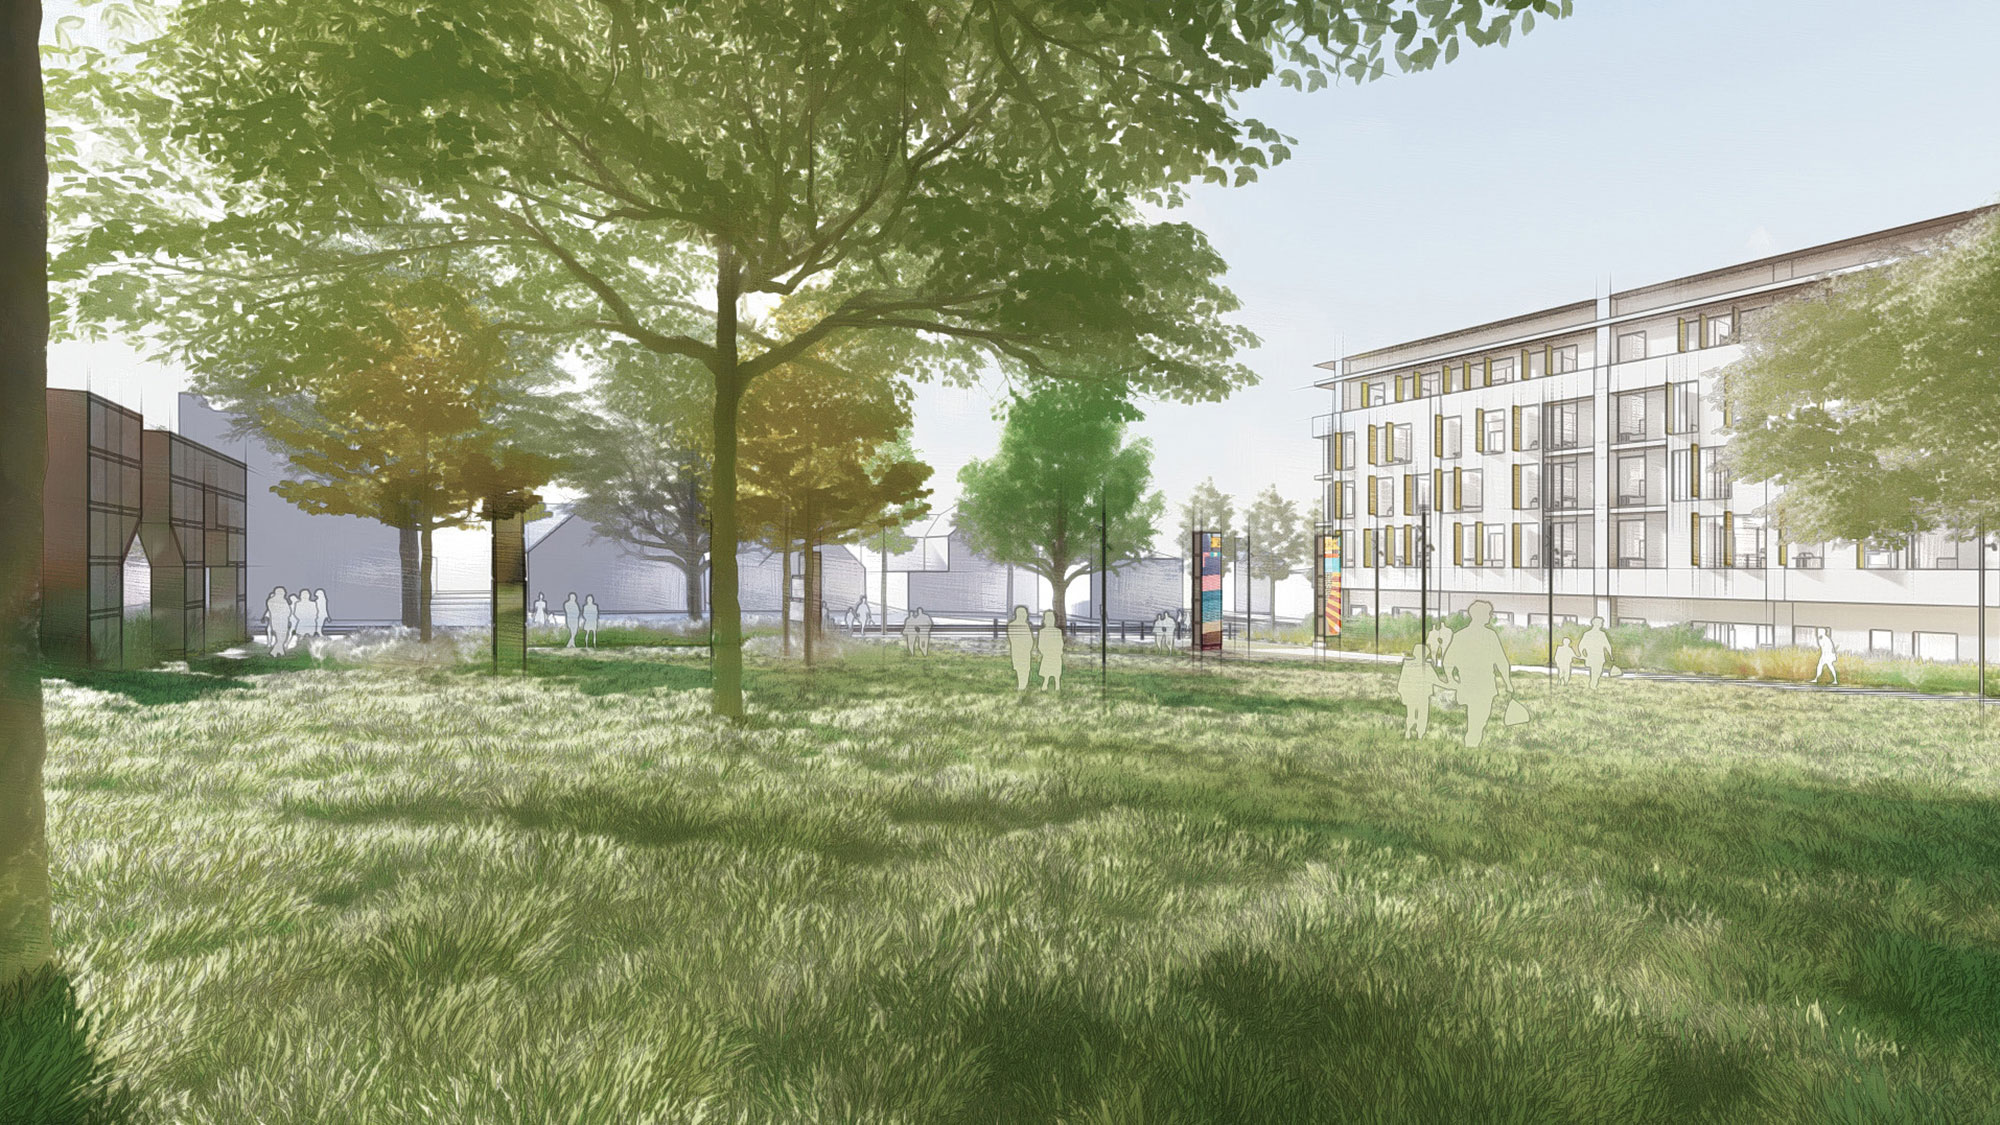 A rendering of planned open space at the People's Park construction site shows an open grassy lawn dotted with trees